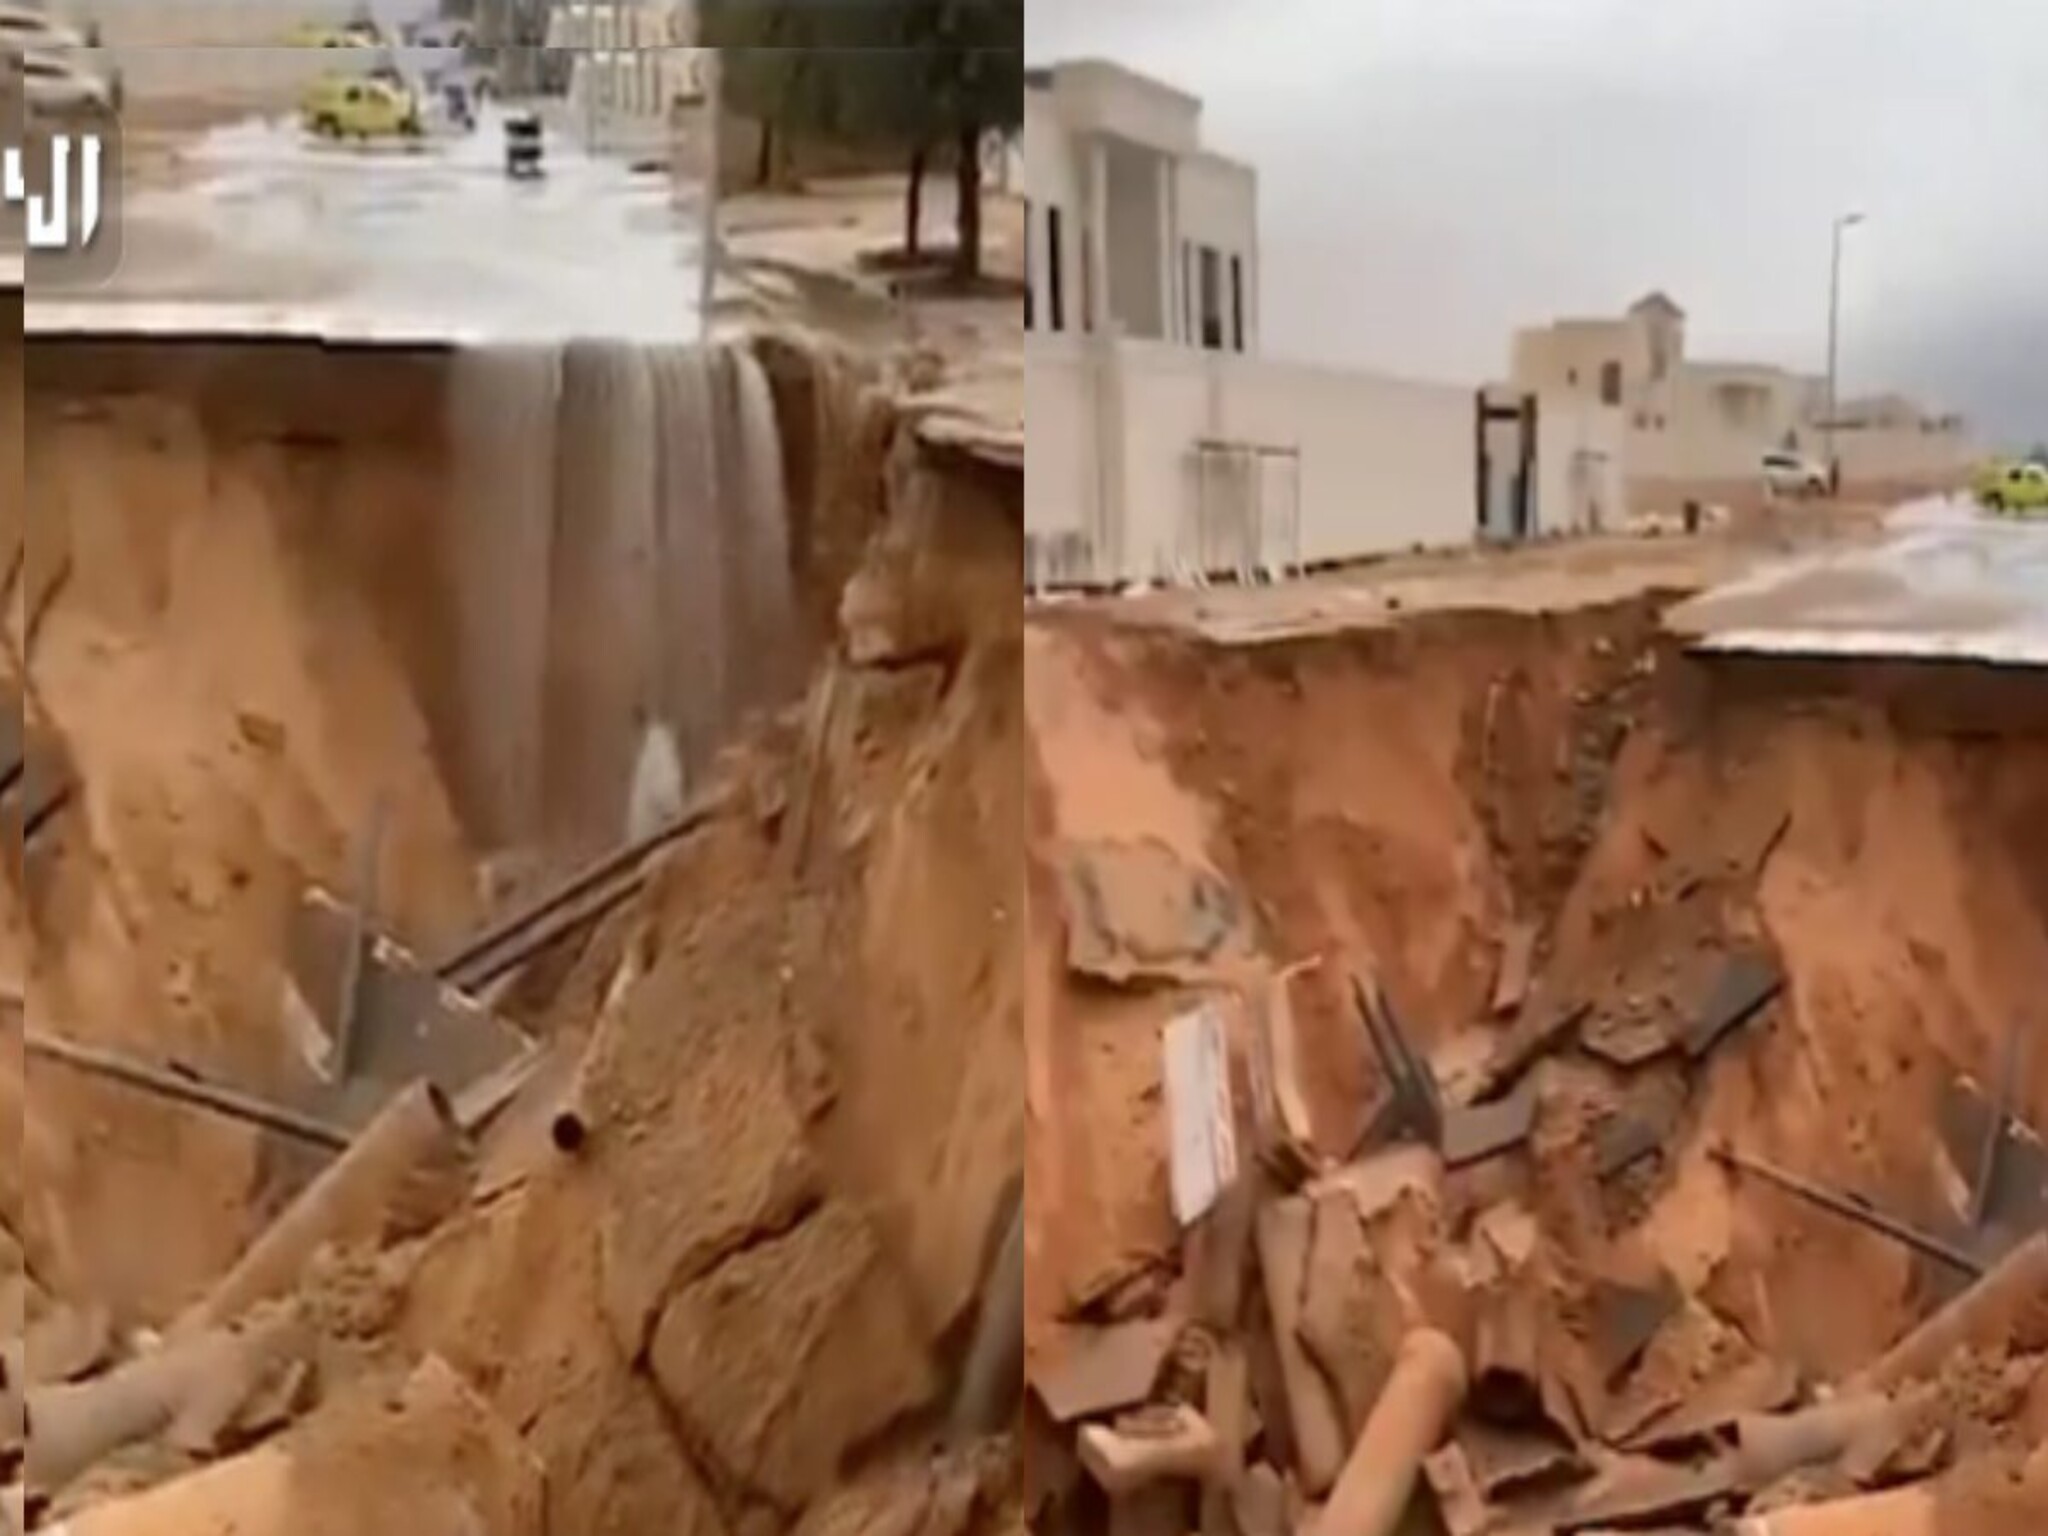 Several roads collapsed in the Emirates due to sweeping floods